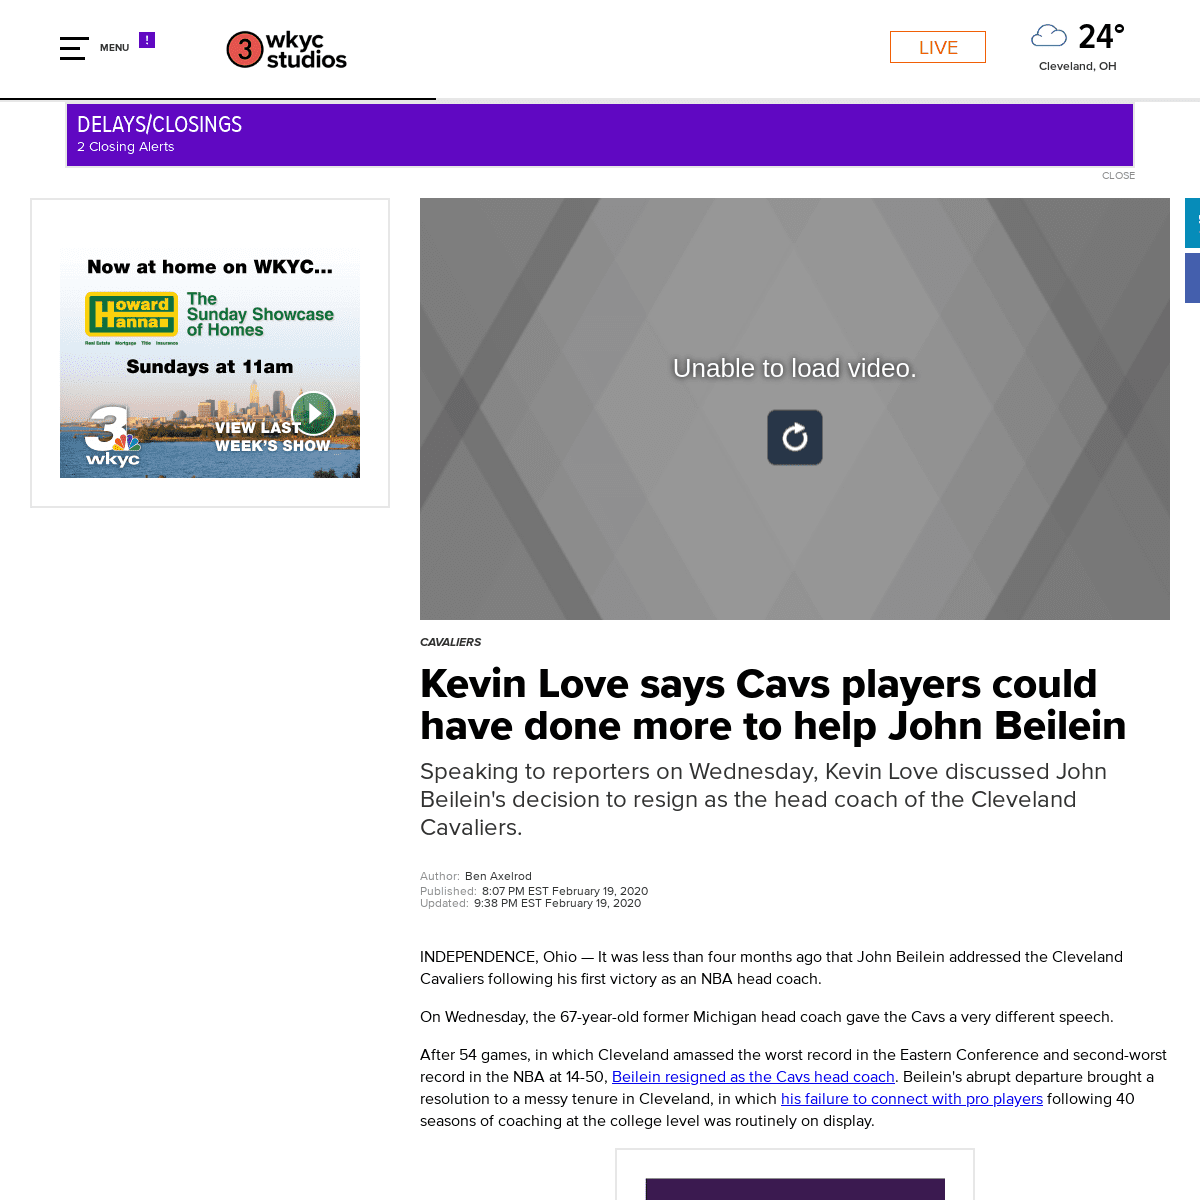 A complete backup of www.wkyc.com/article/sports/nba/cavaliers/kevin-love-says-cavs-players-could-have-done-more-to-help-john-be